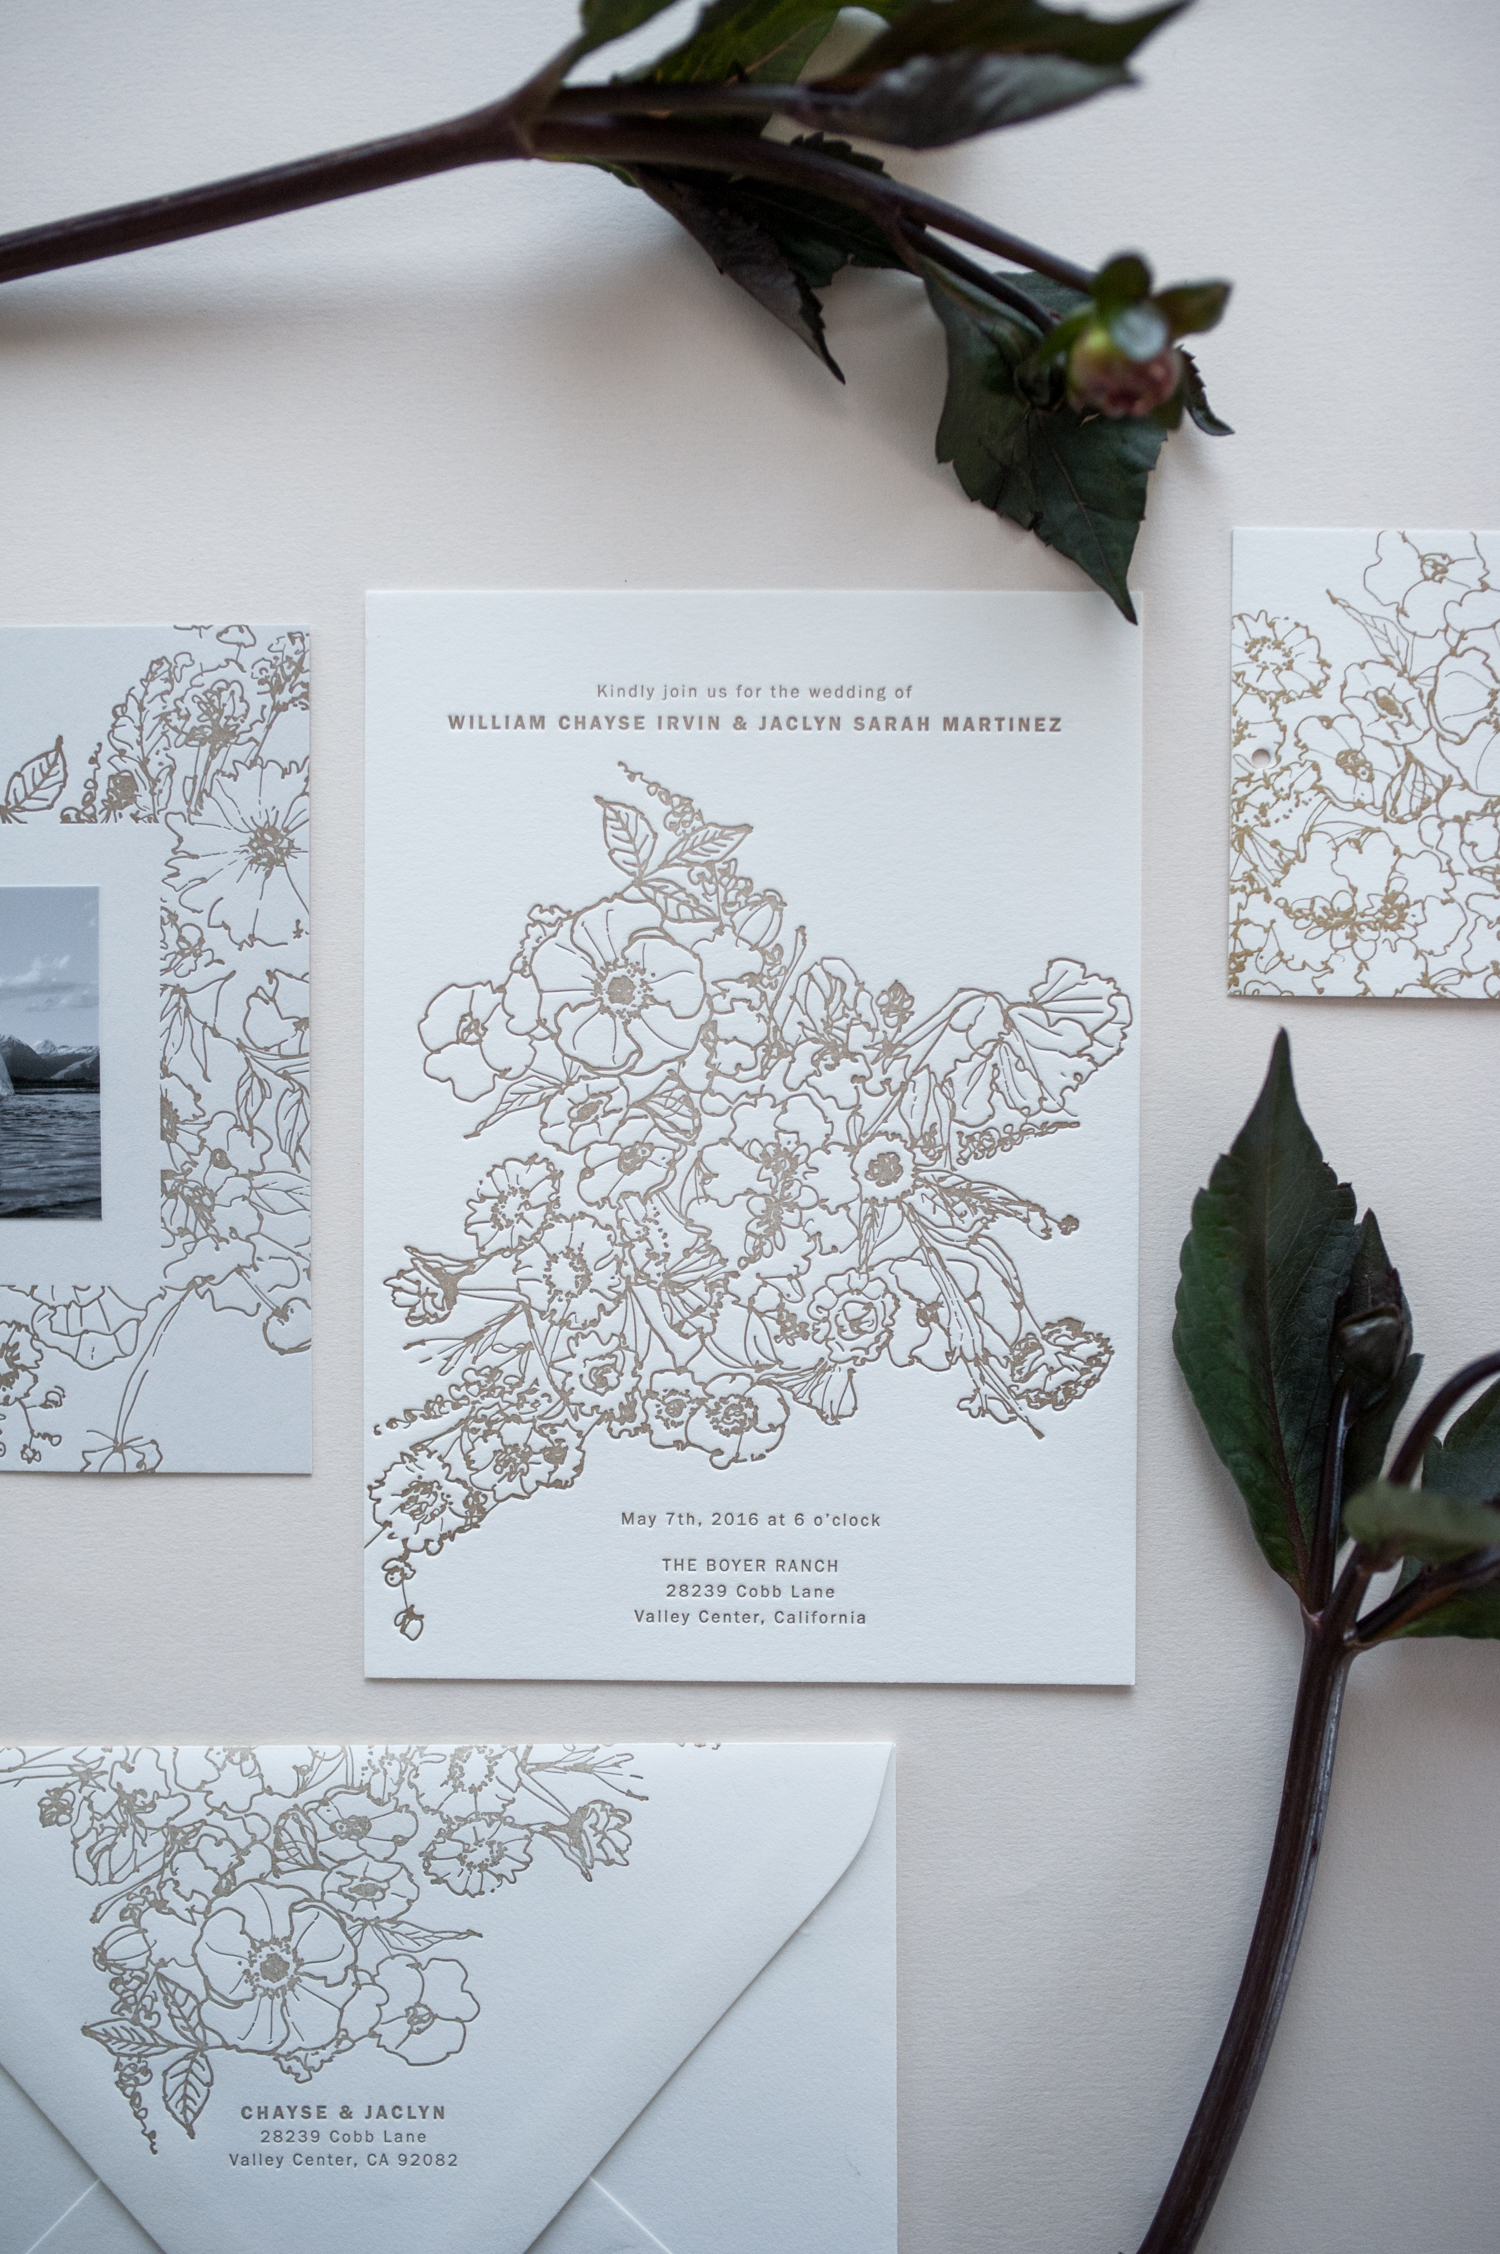 Allover Floral Invitation in Cream by Paper & Type, styling and photography by Emilie Anne Szabo